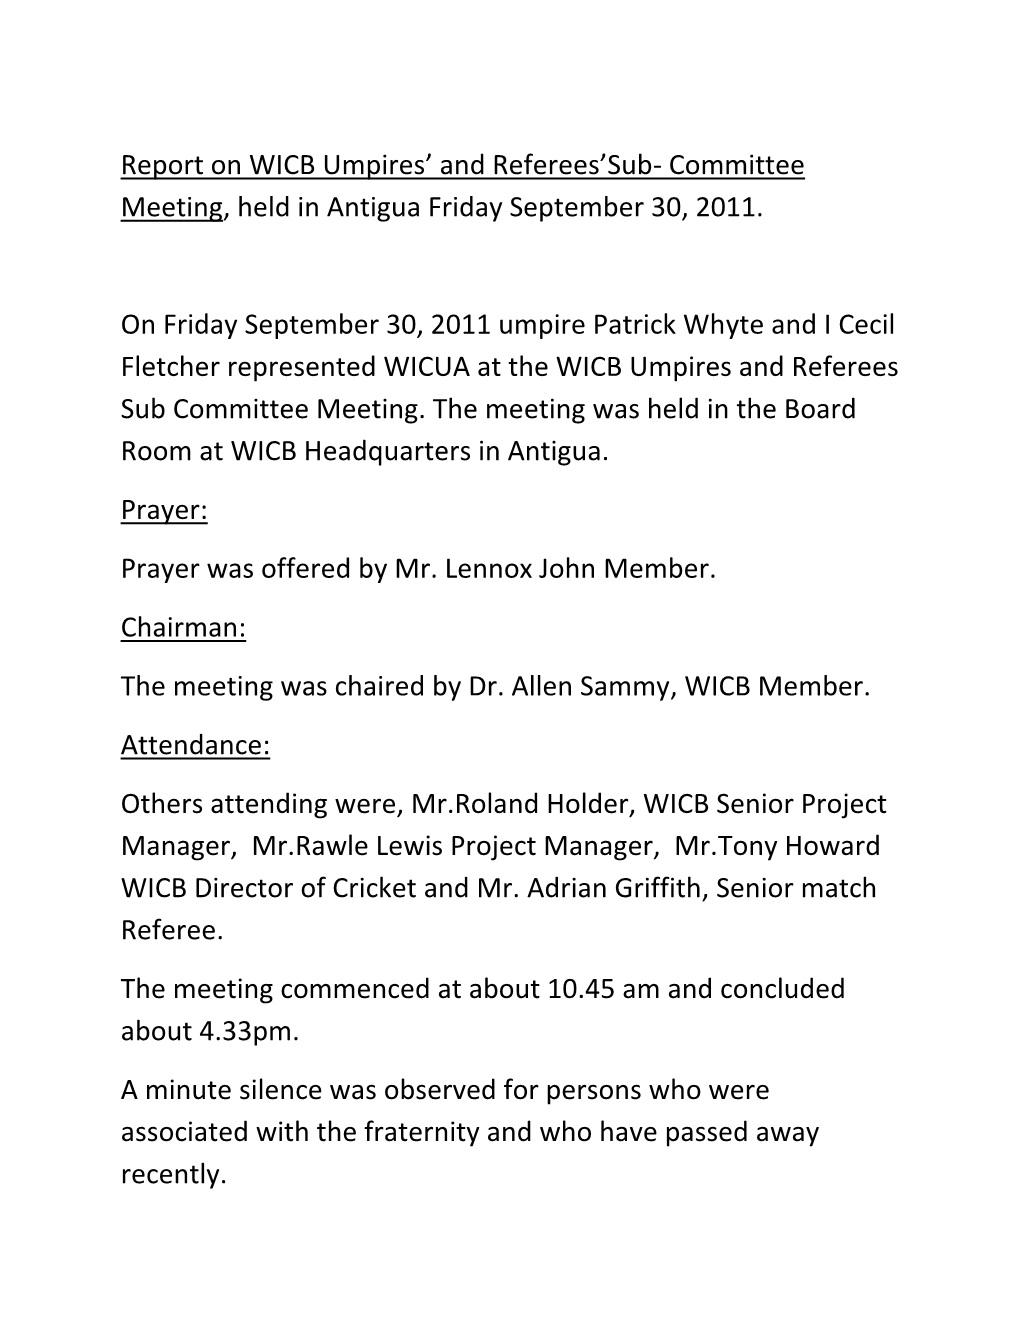 Report on WICB Umpires' and Referees'sub- Committee Meeting, Held in Antigua Friday September 30, 2011. on Friday September